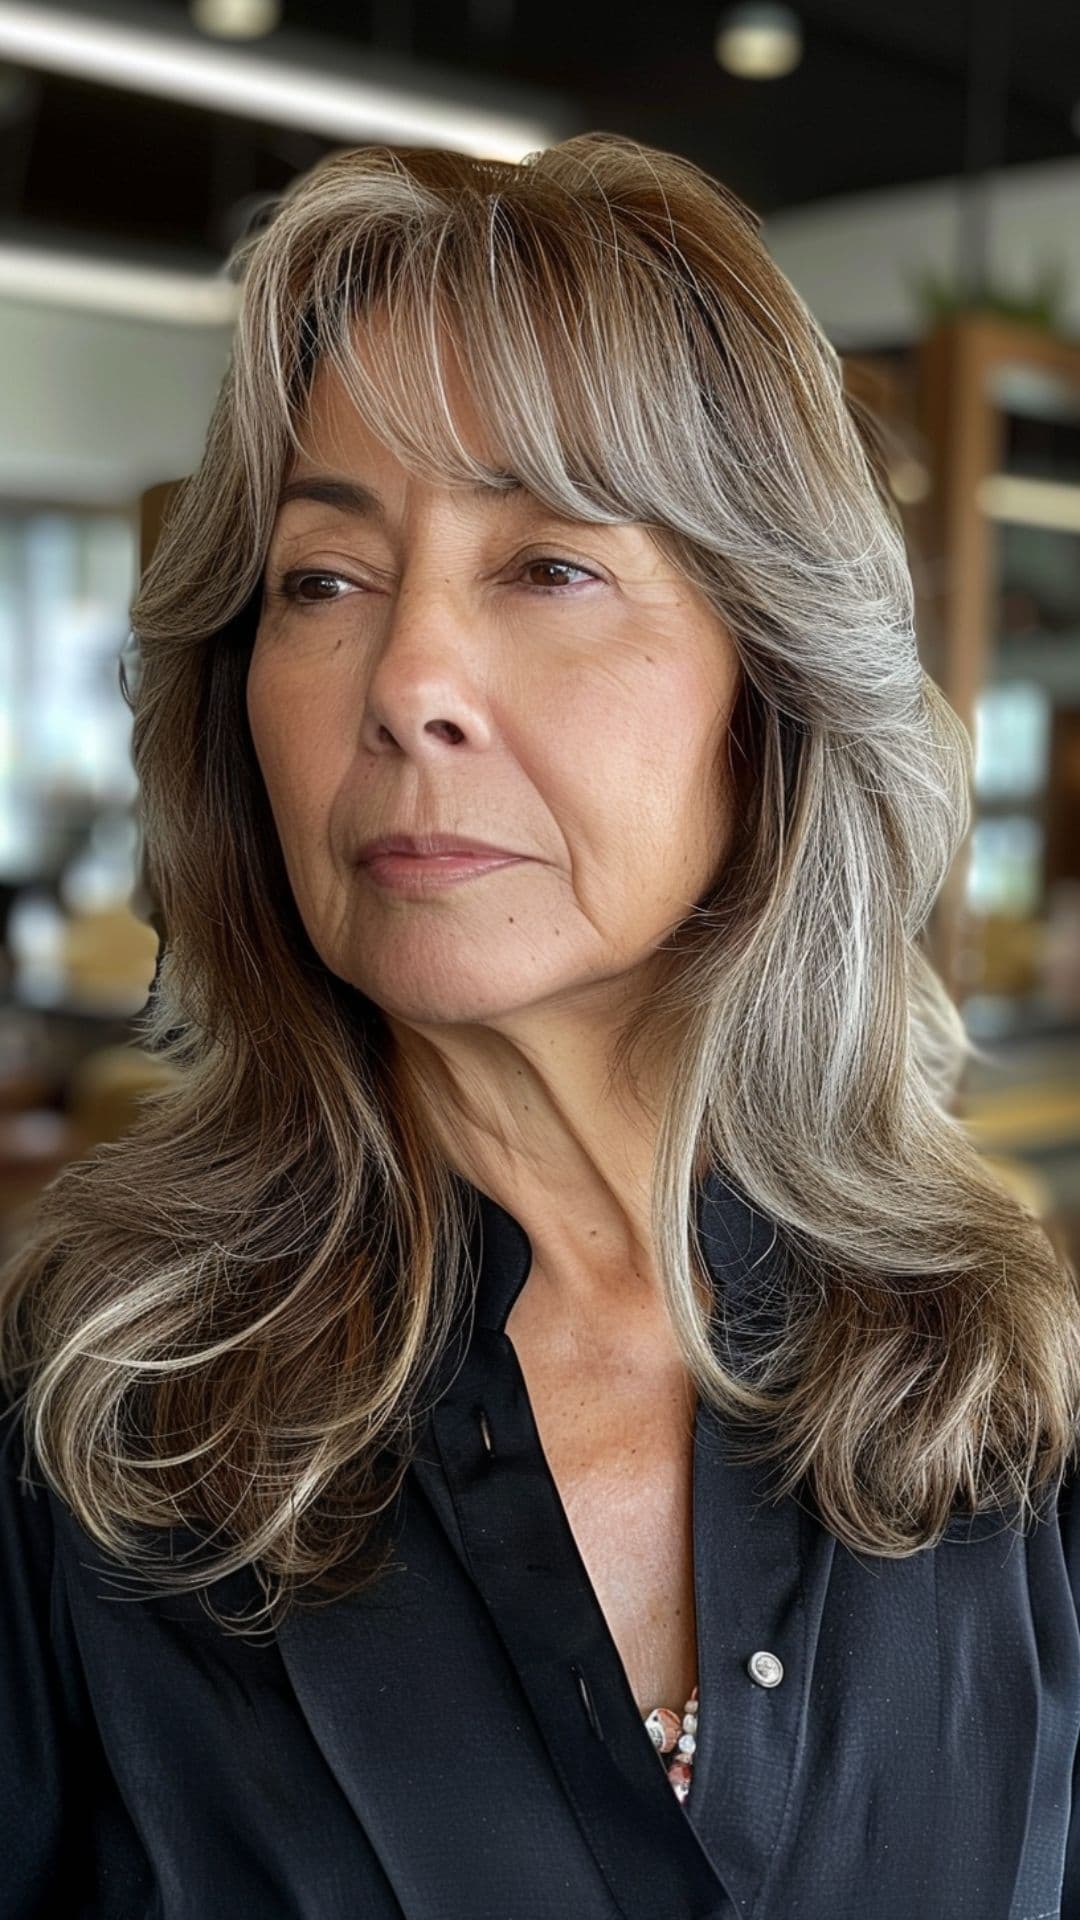 An older woman modelling a face-framing bangs with long layers.